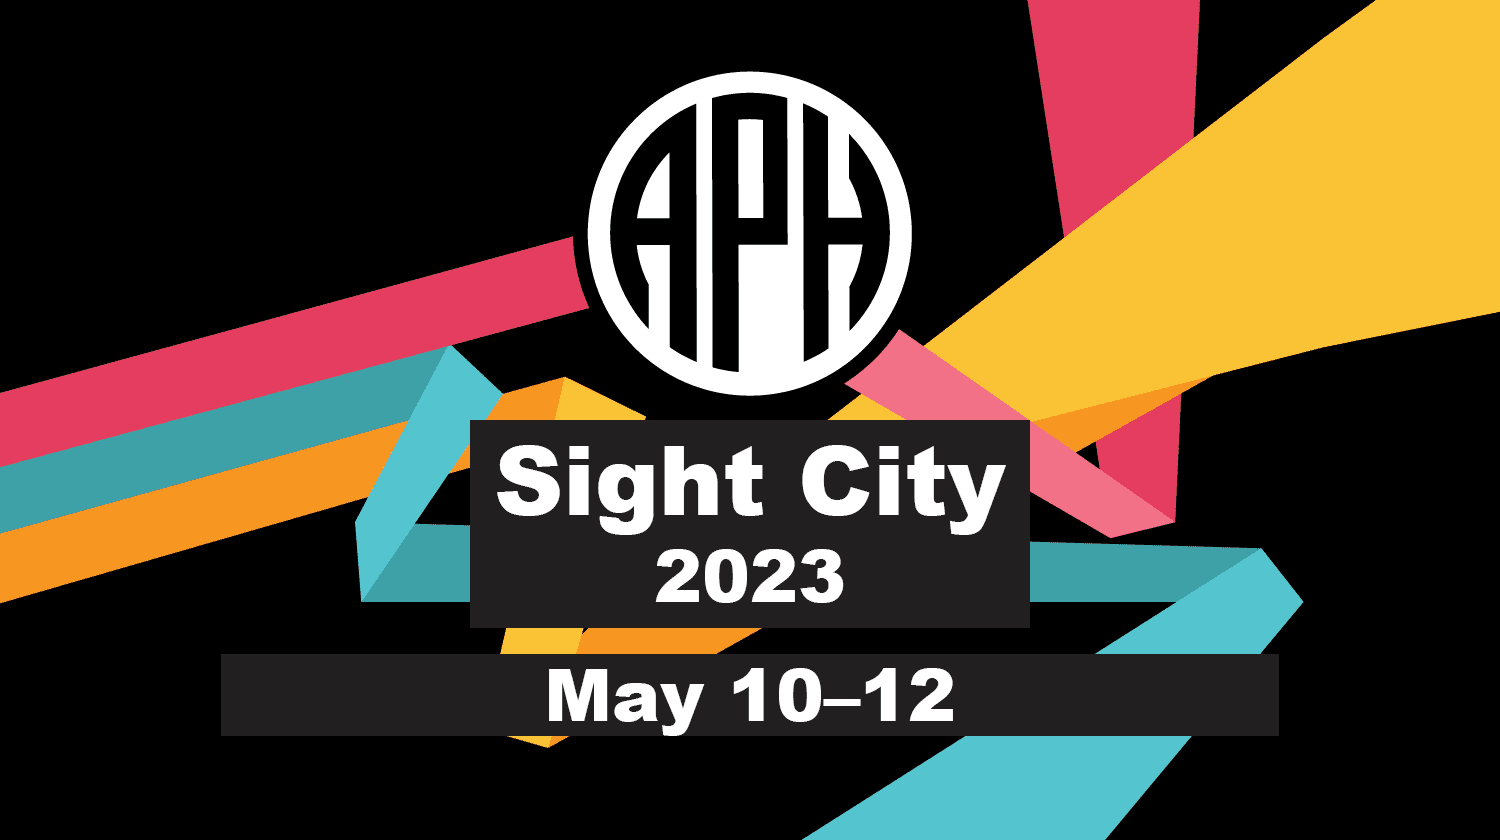 APH event banner. Three parallel bars in the APH brand colors of pomegranate, teal, and gold diverge and zigzag dynamically behind the APH logo. Text reads: Sight City 2023, May 10 - 12.